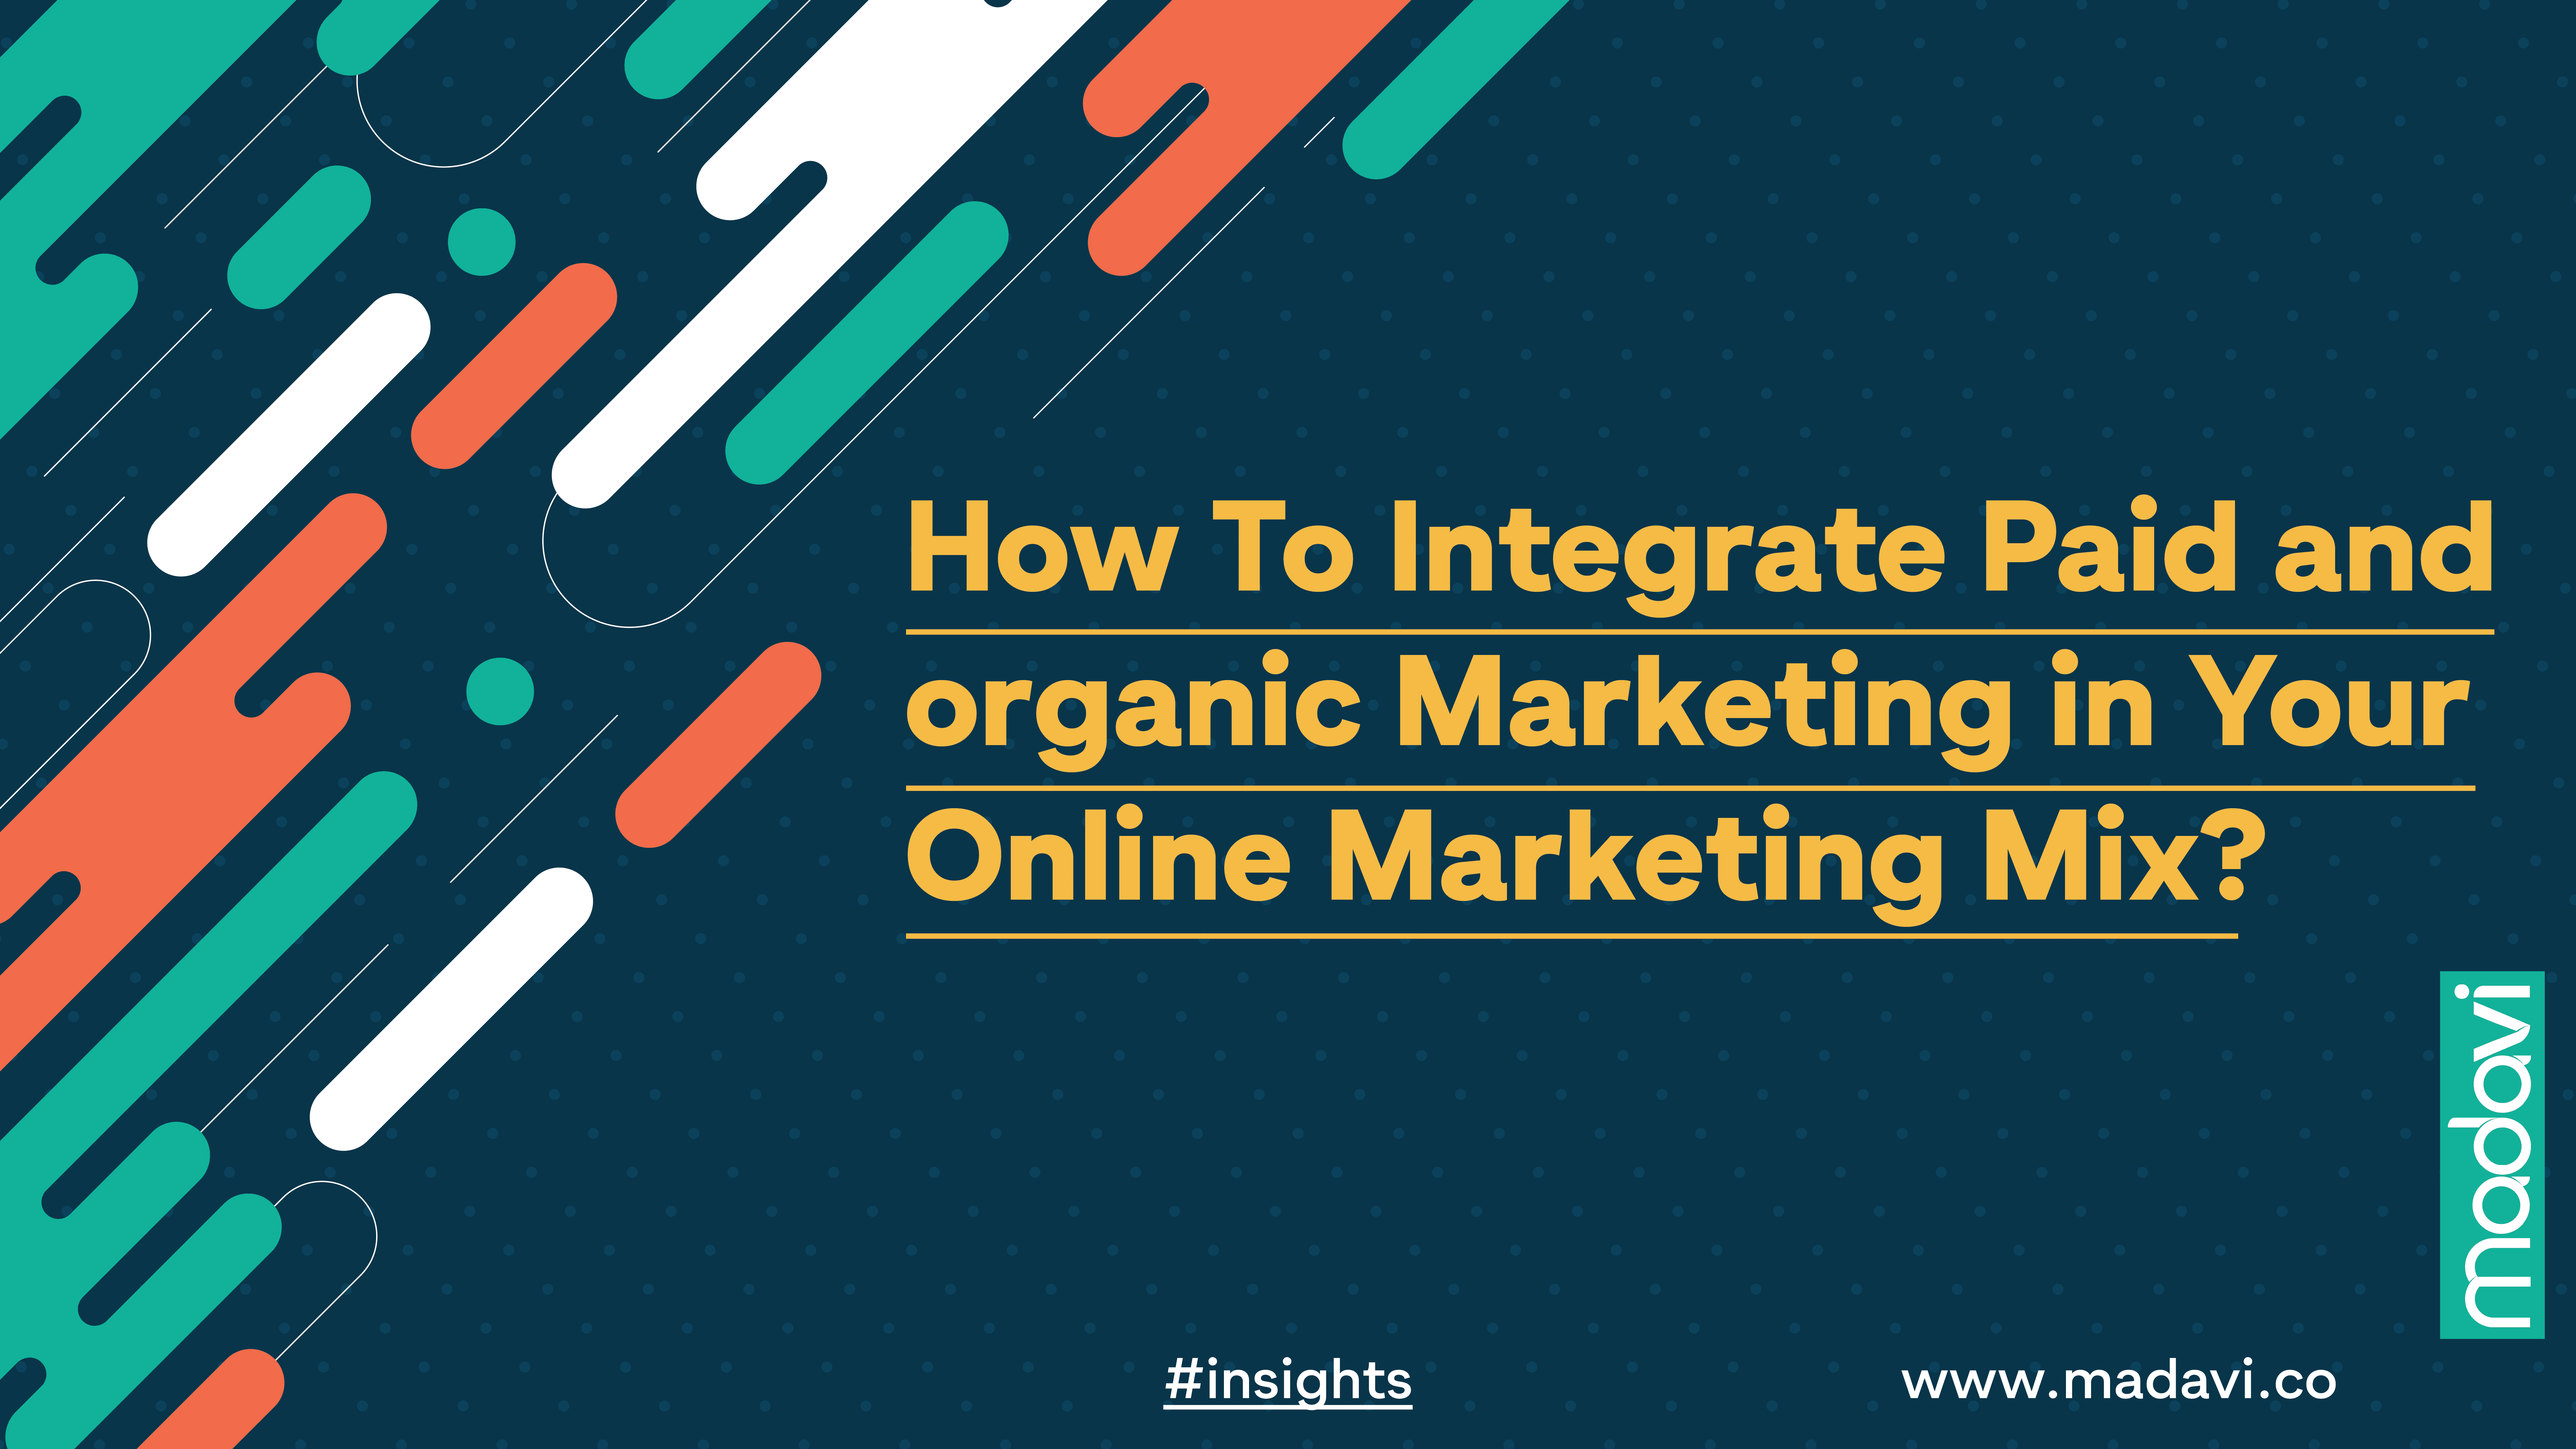 How To Integrate Paid and organic Marketing in Your Online Marketing Mix 01